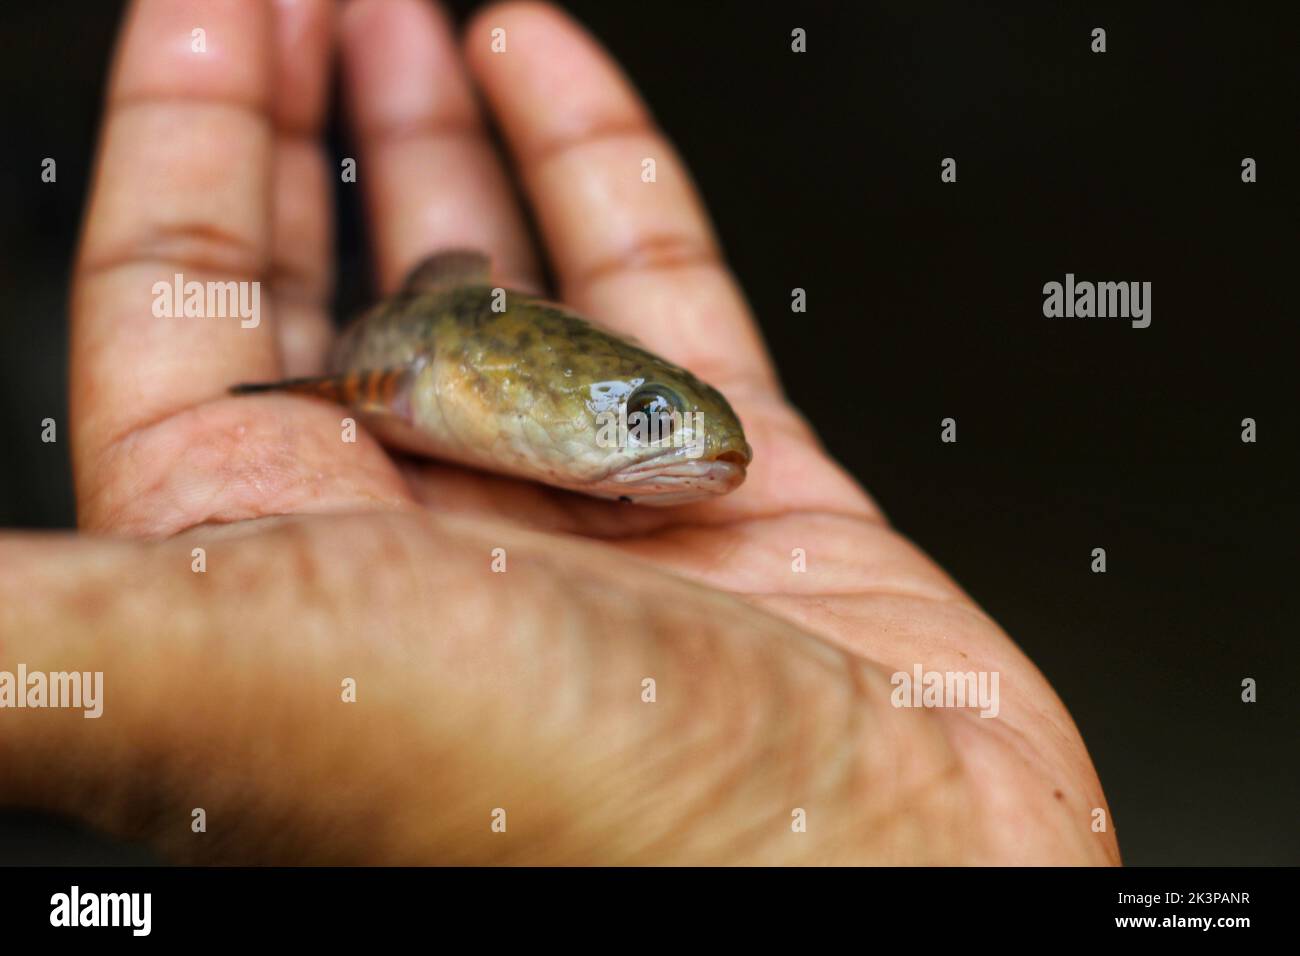 A closeup of a striped or chevron snakehead on a person's hand palm against a black background Stock Photo